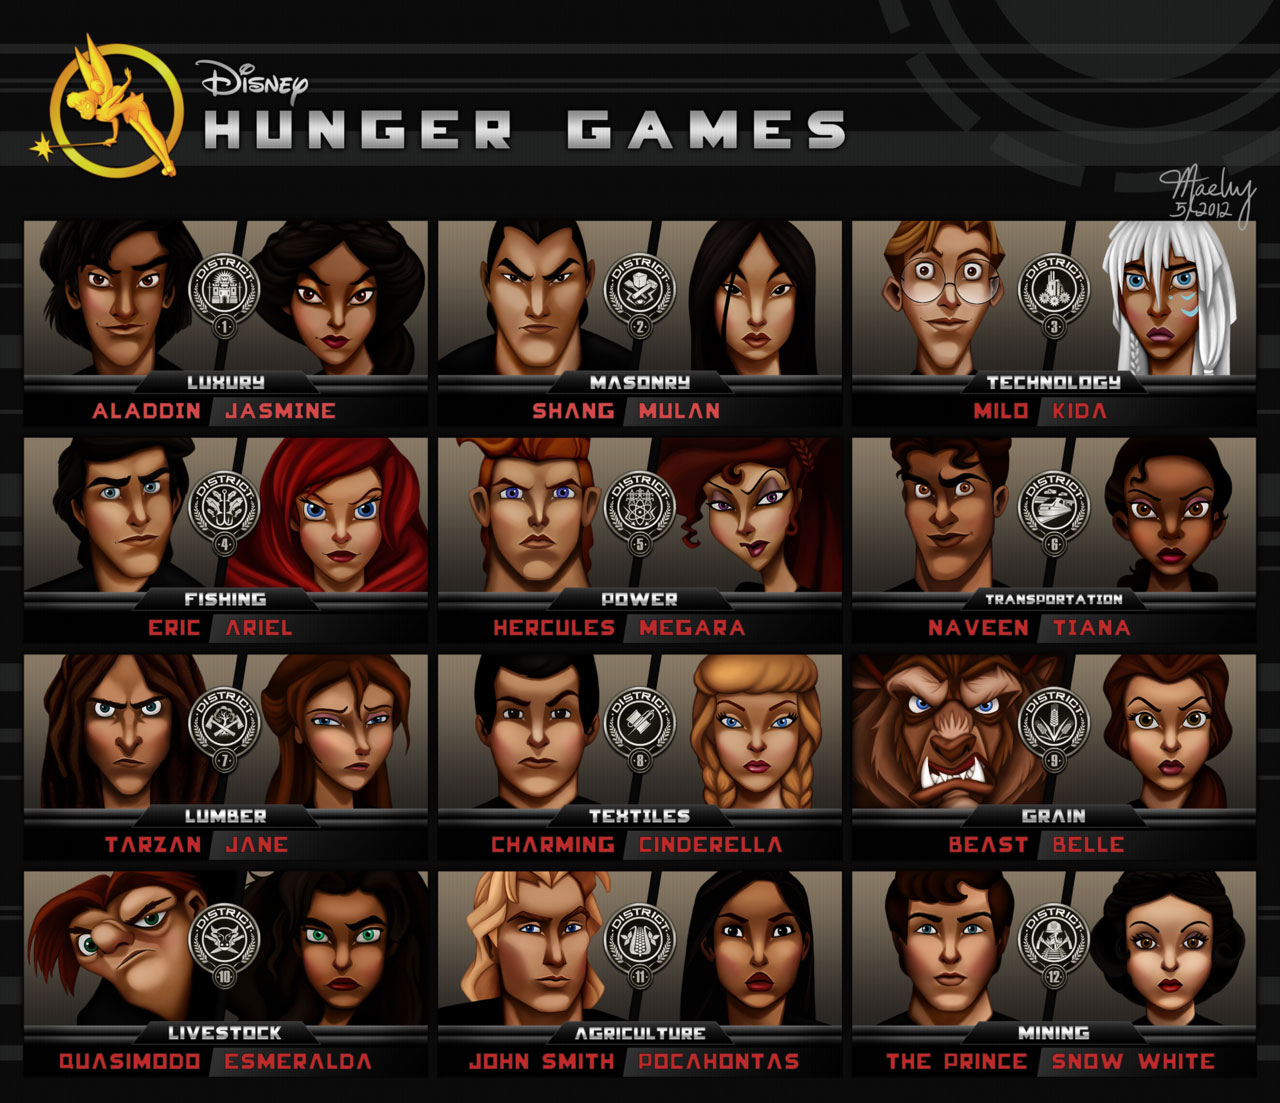 hunger games characters list with pictures